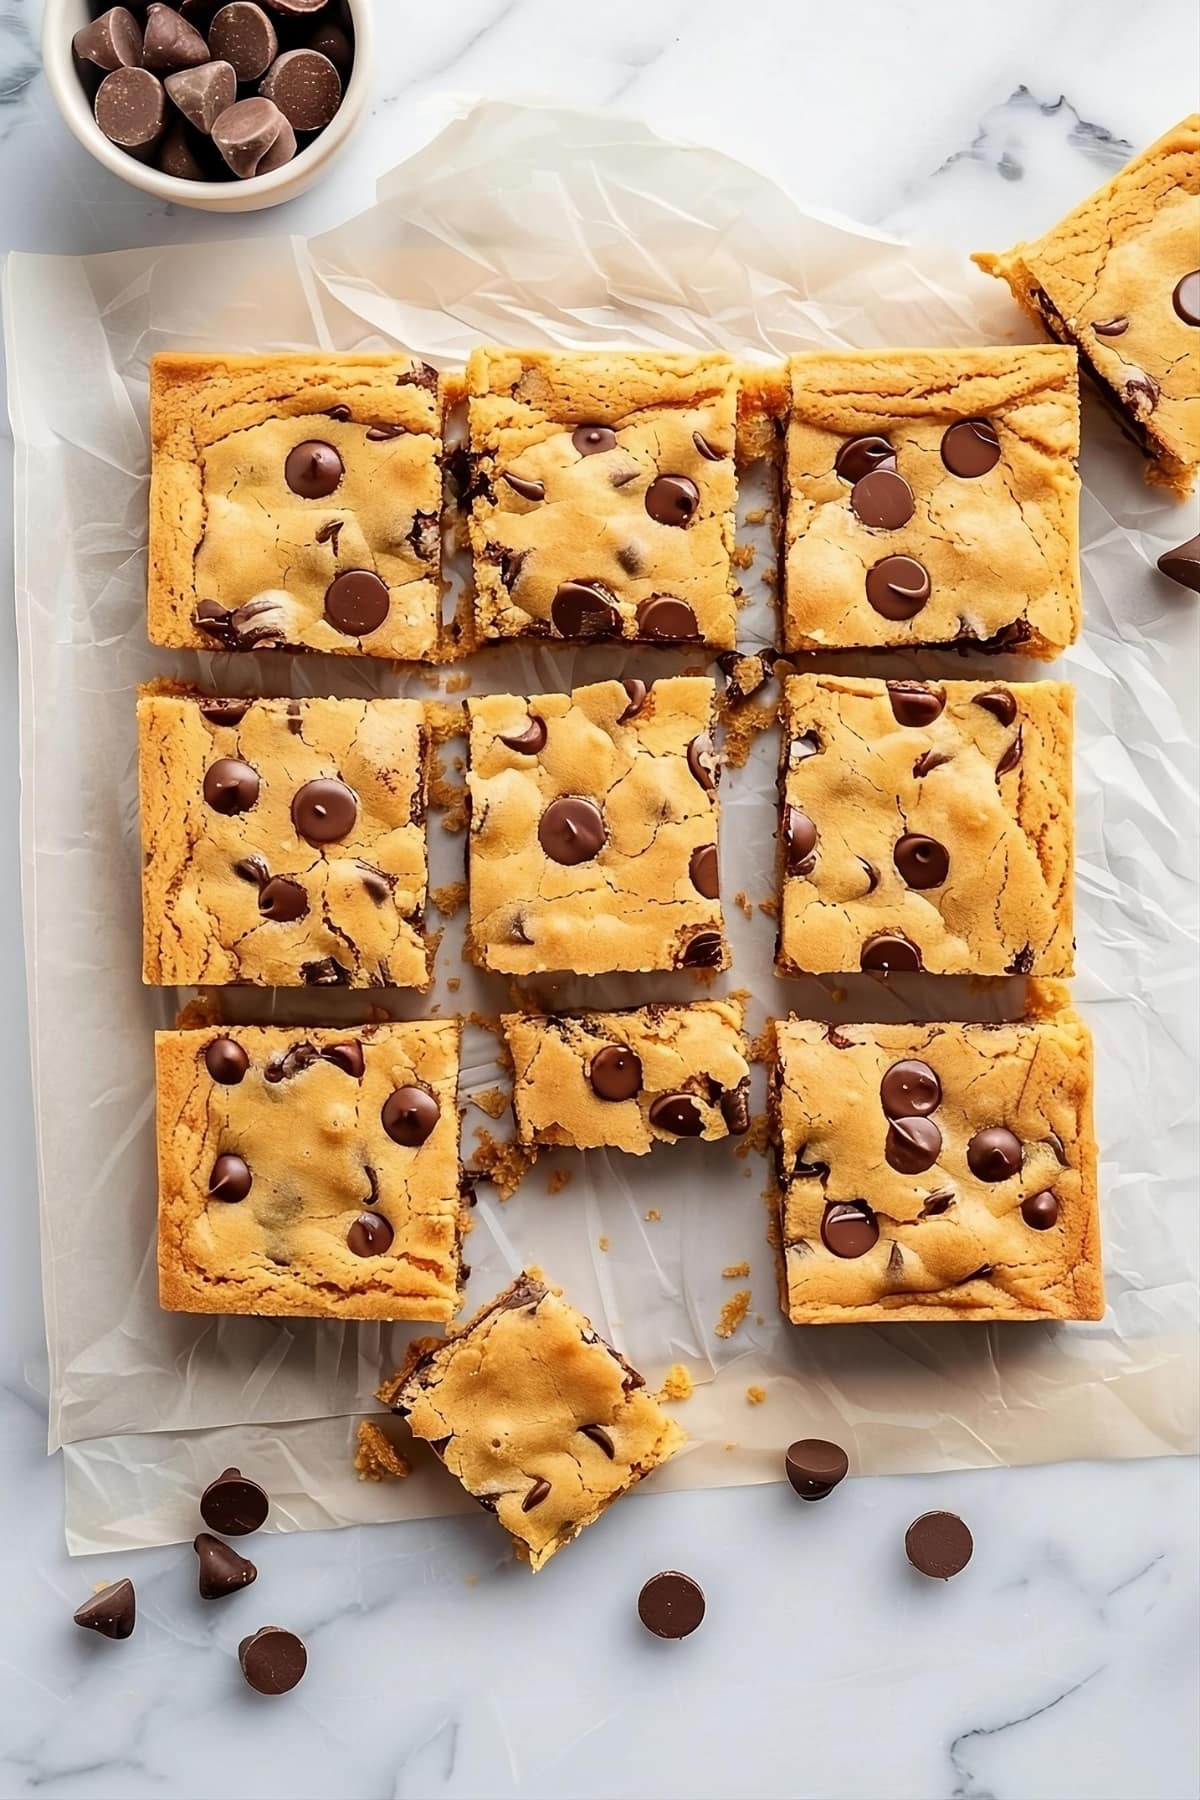 Sliced in squares cake mix cookie bars in a parchment paper on a white marble surface.